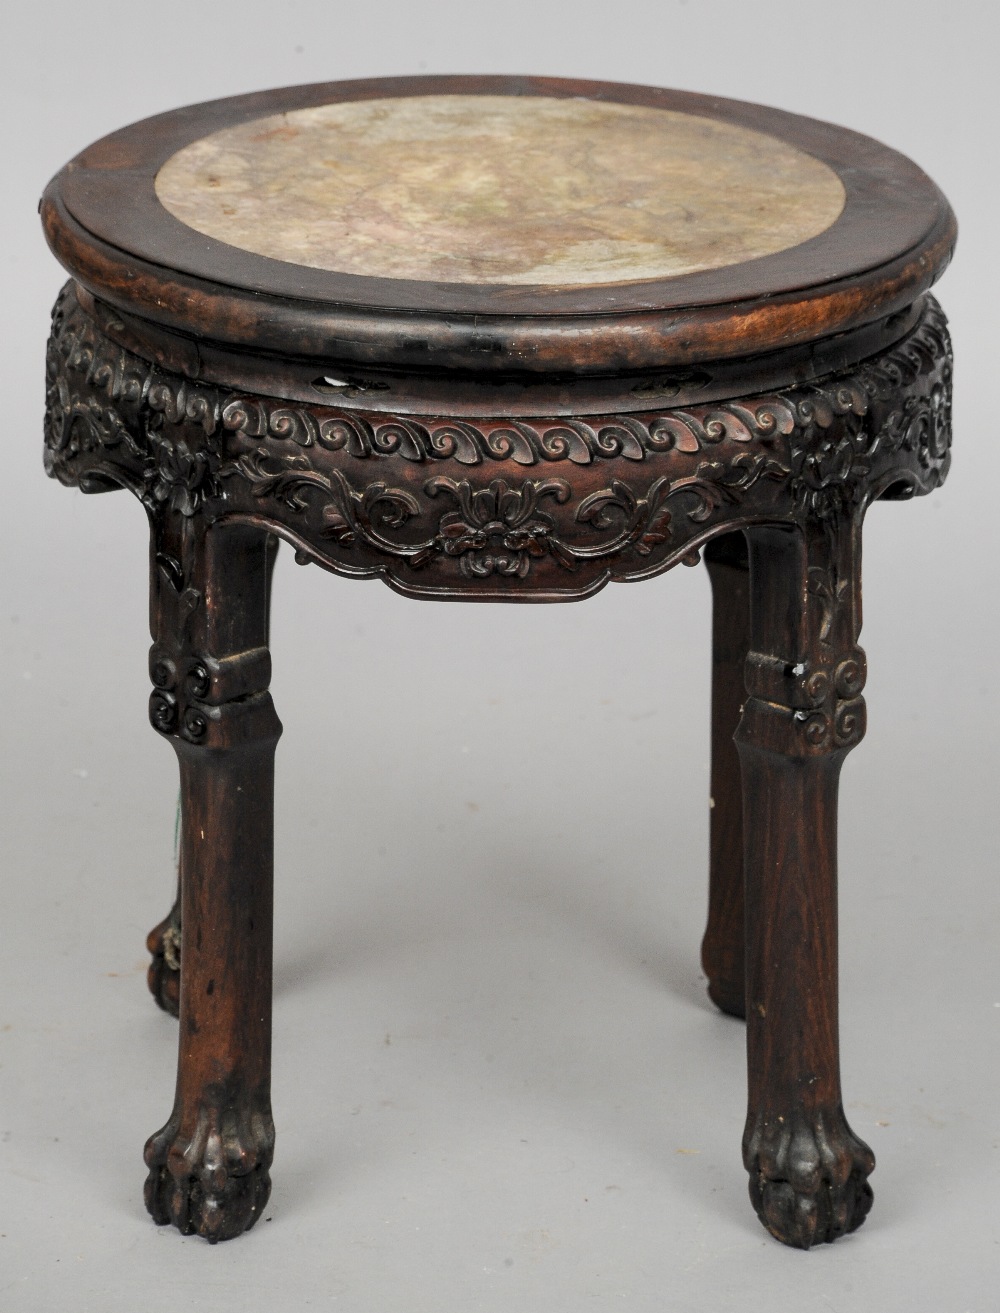 A 19th century Chinese marble inset carved hardwood side table
The circular top with inset marble